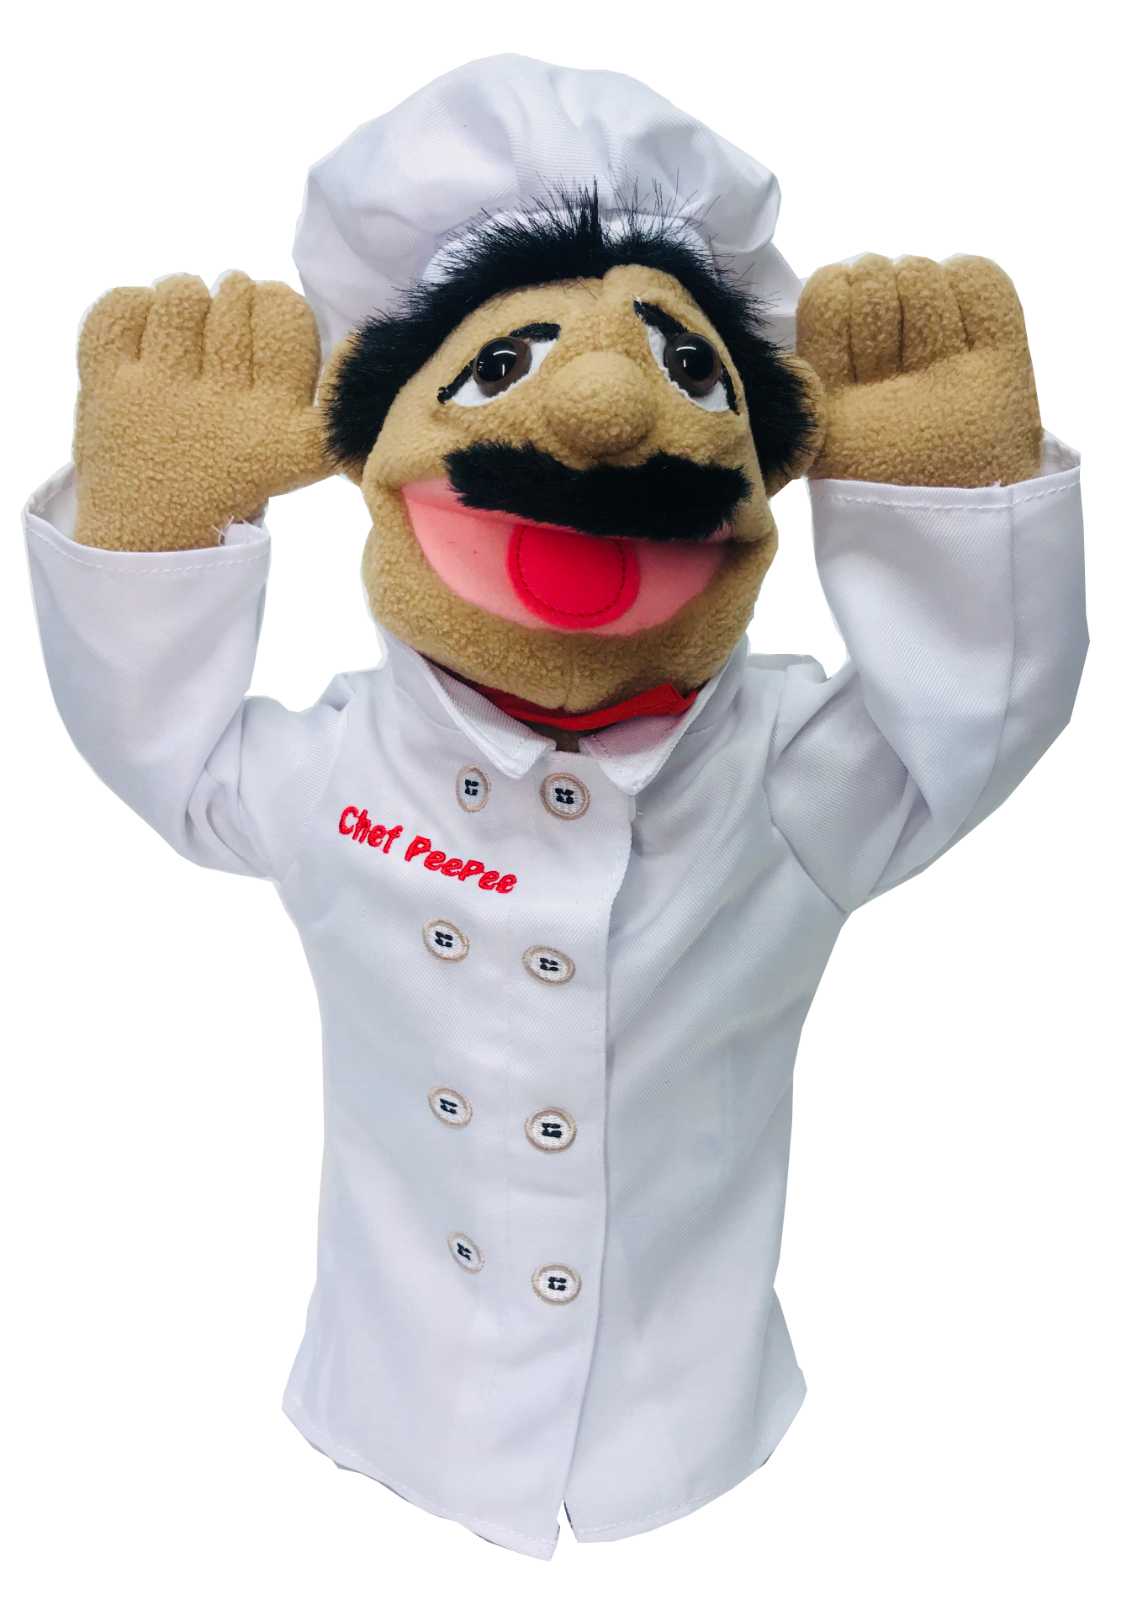 bob bihler recommends chef peepee puppet amazon pic